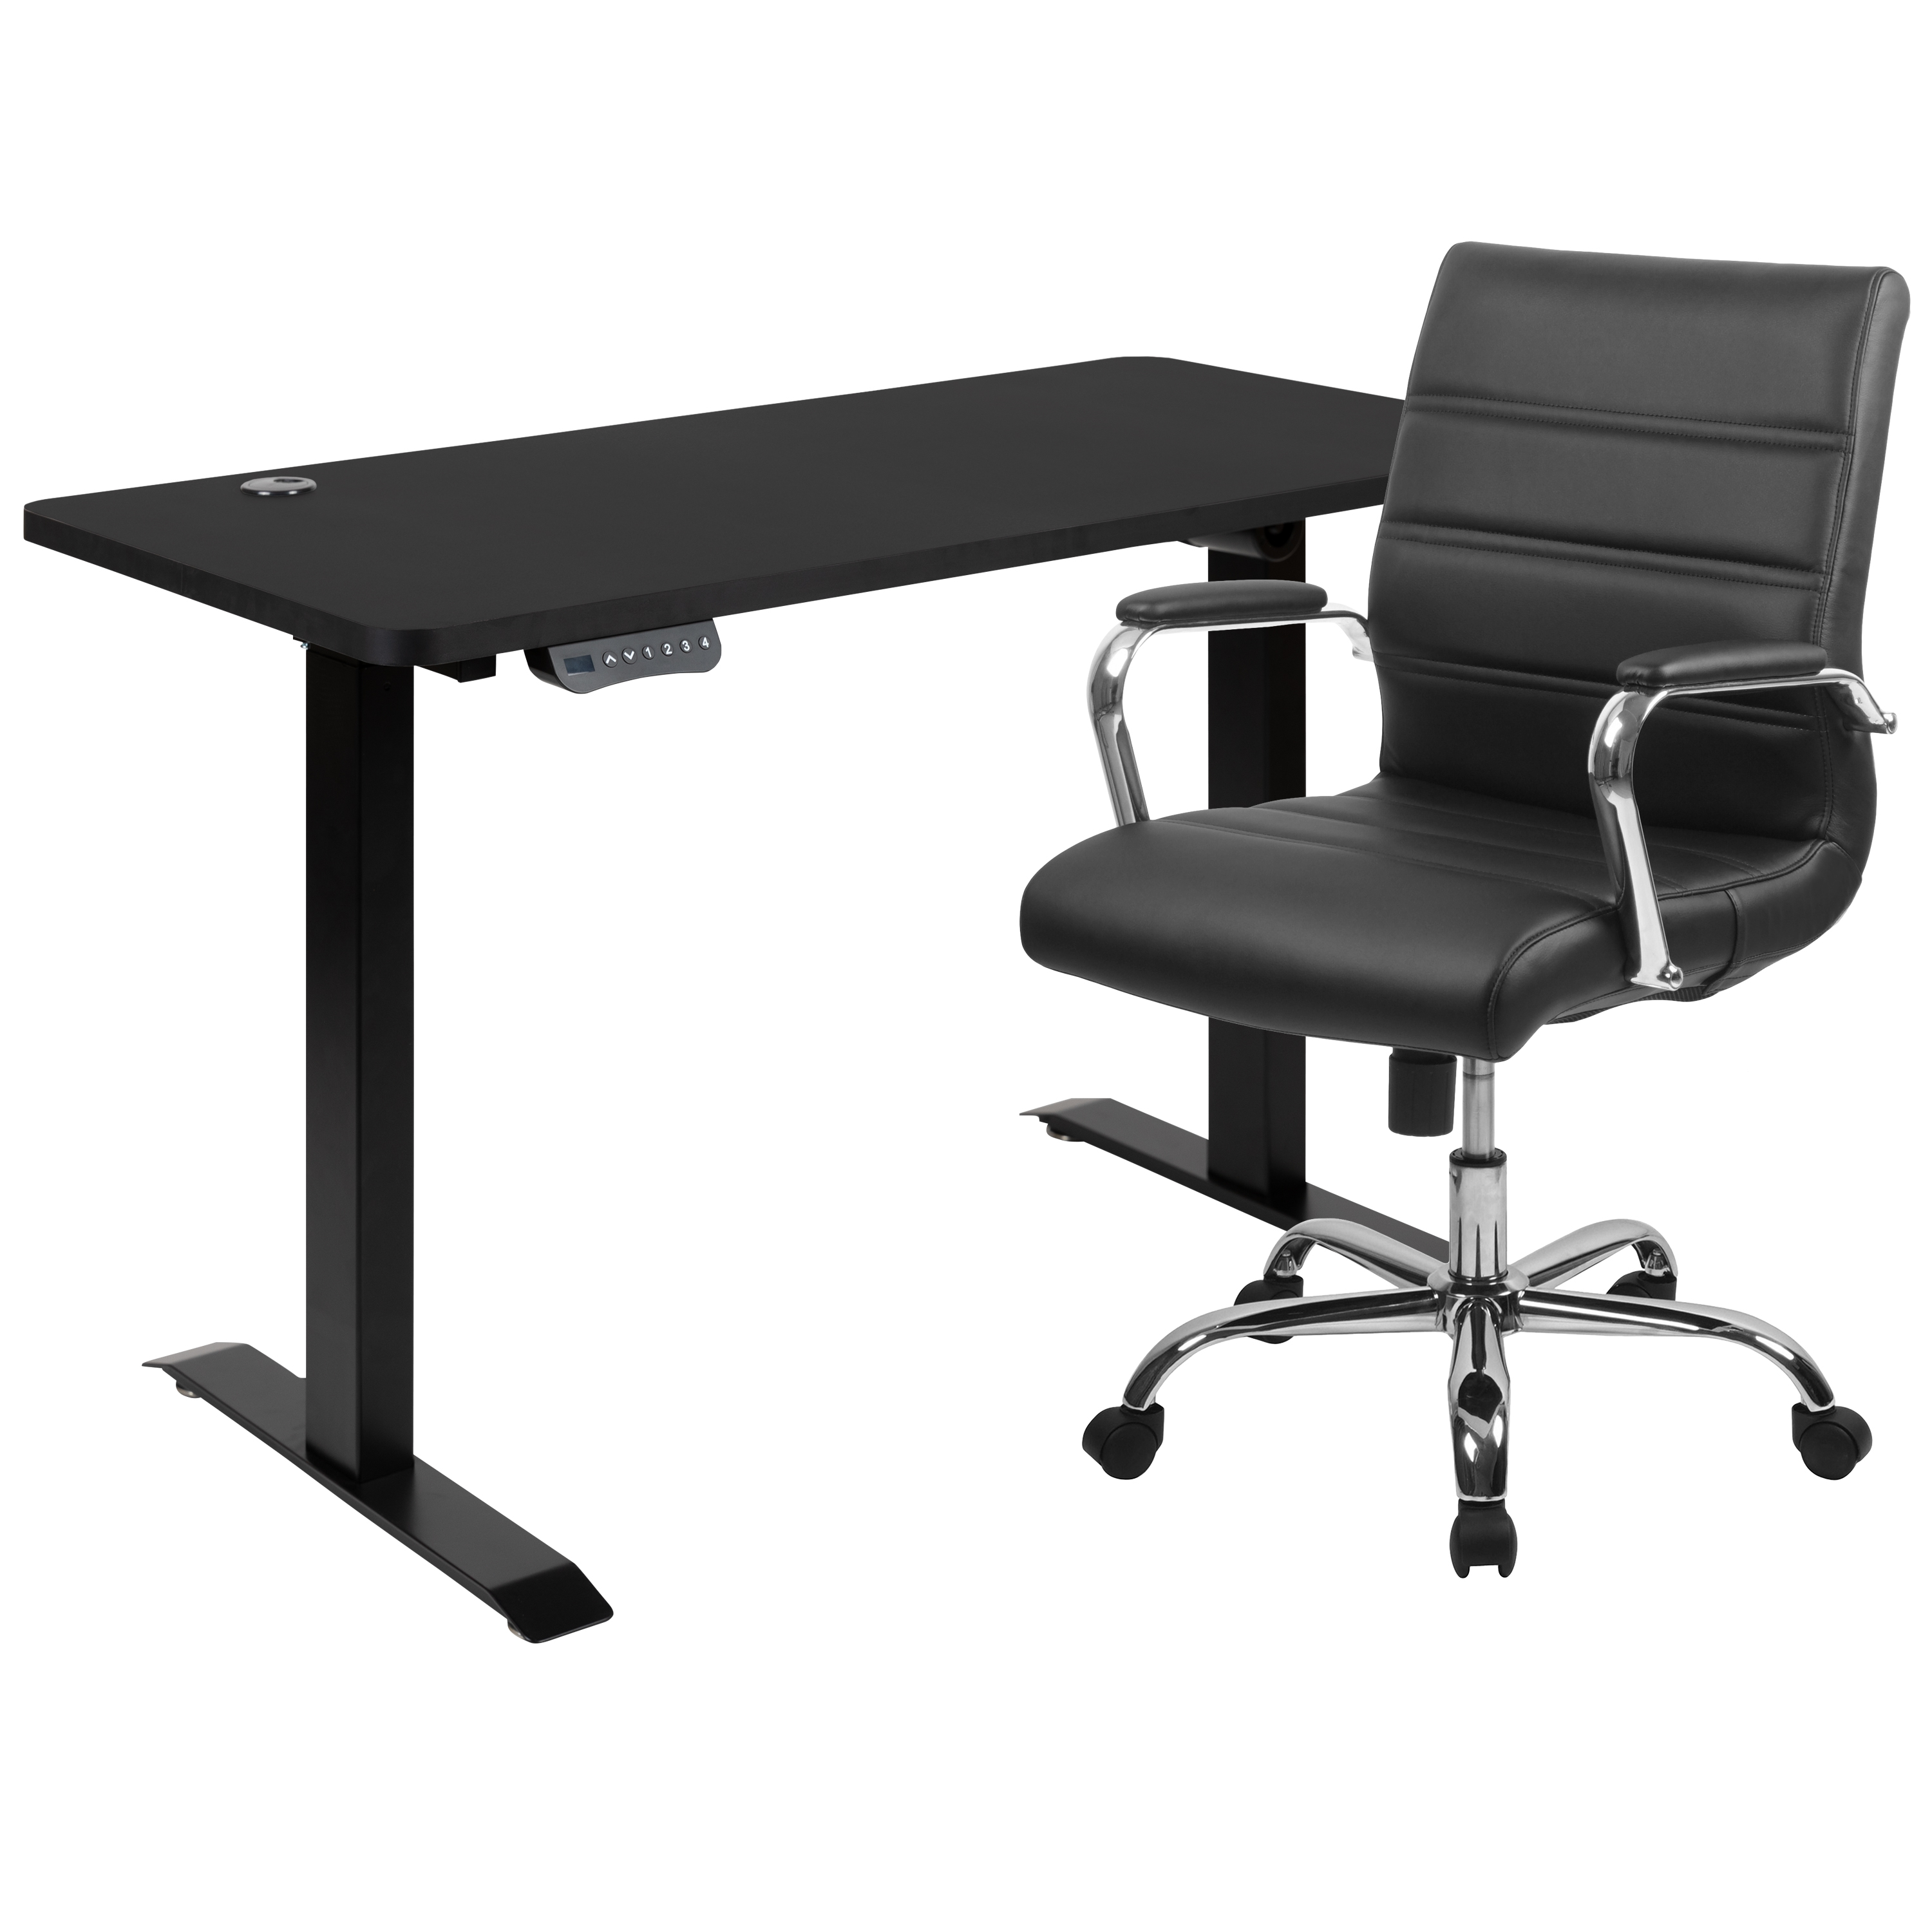 Flash Furniture 48" Wide Black Electric Height Adjustable Standing Desk with Mid-Back Black LeatherSoft and Chrome Executive Swivel Office Chair - image 2 of 14